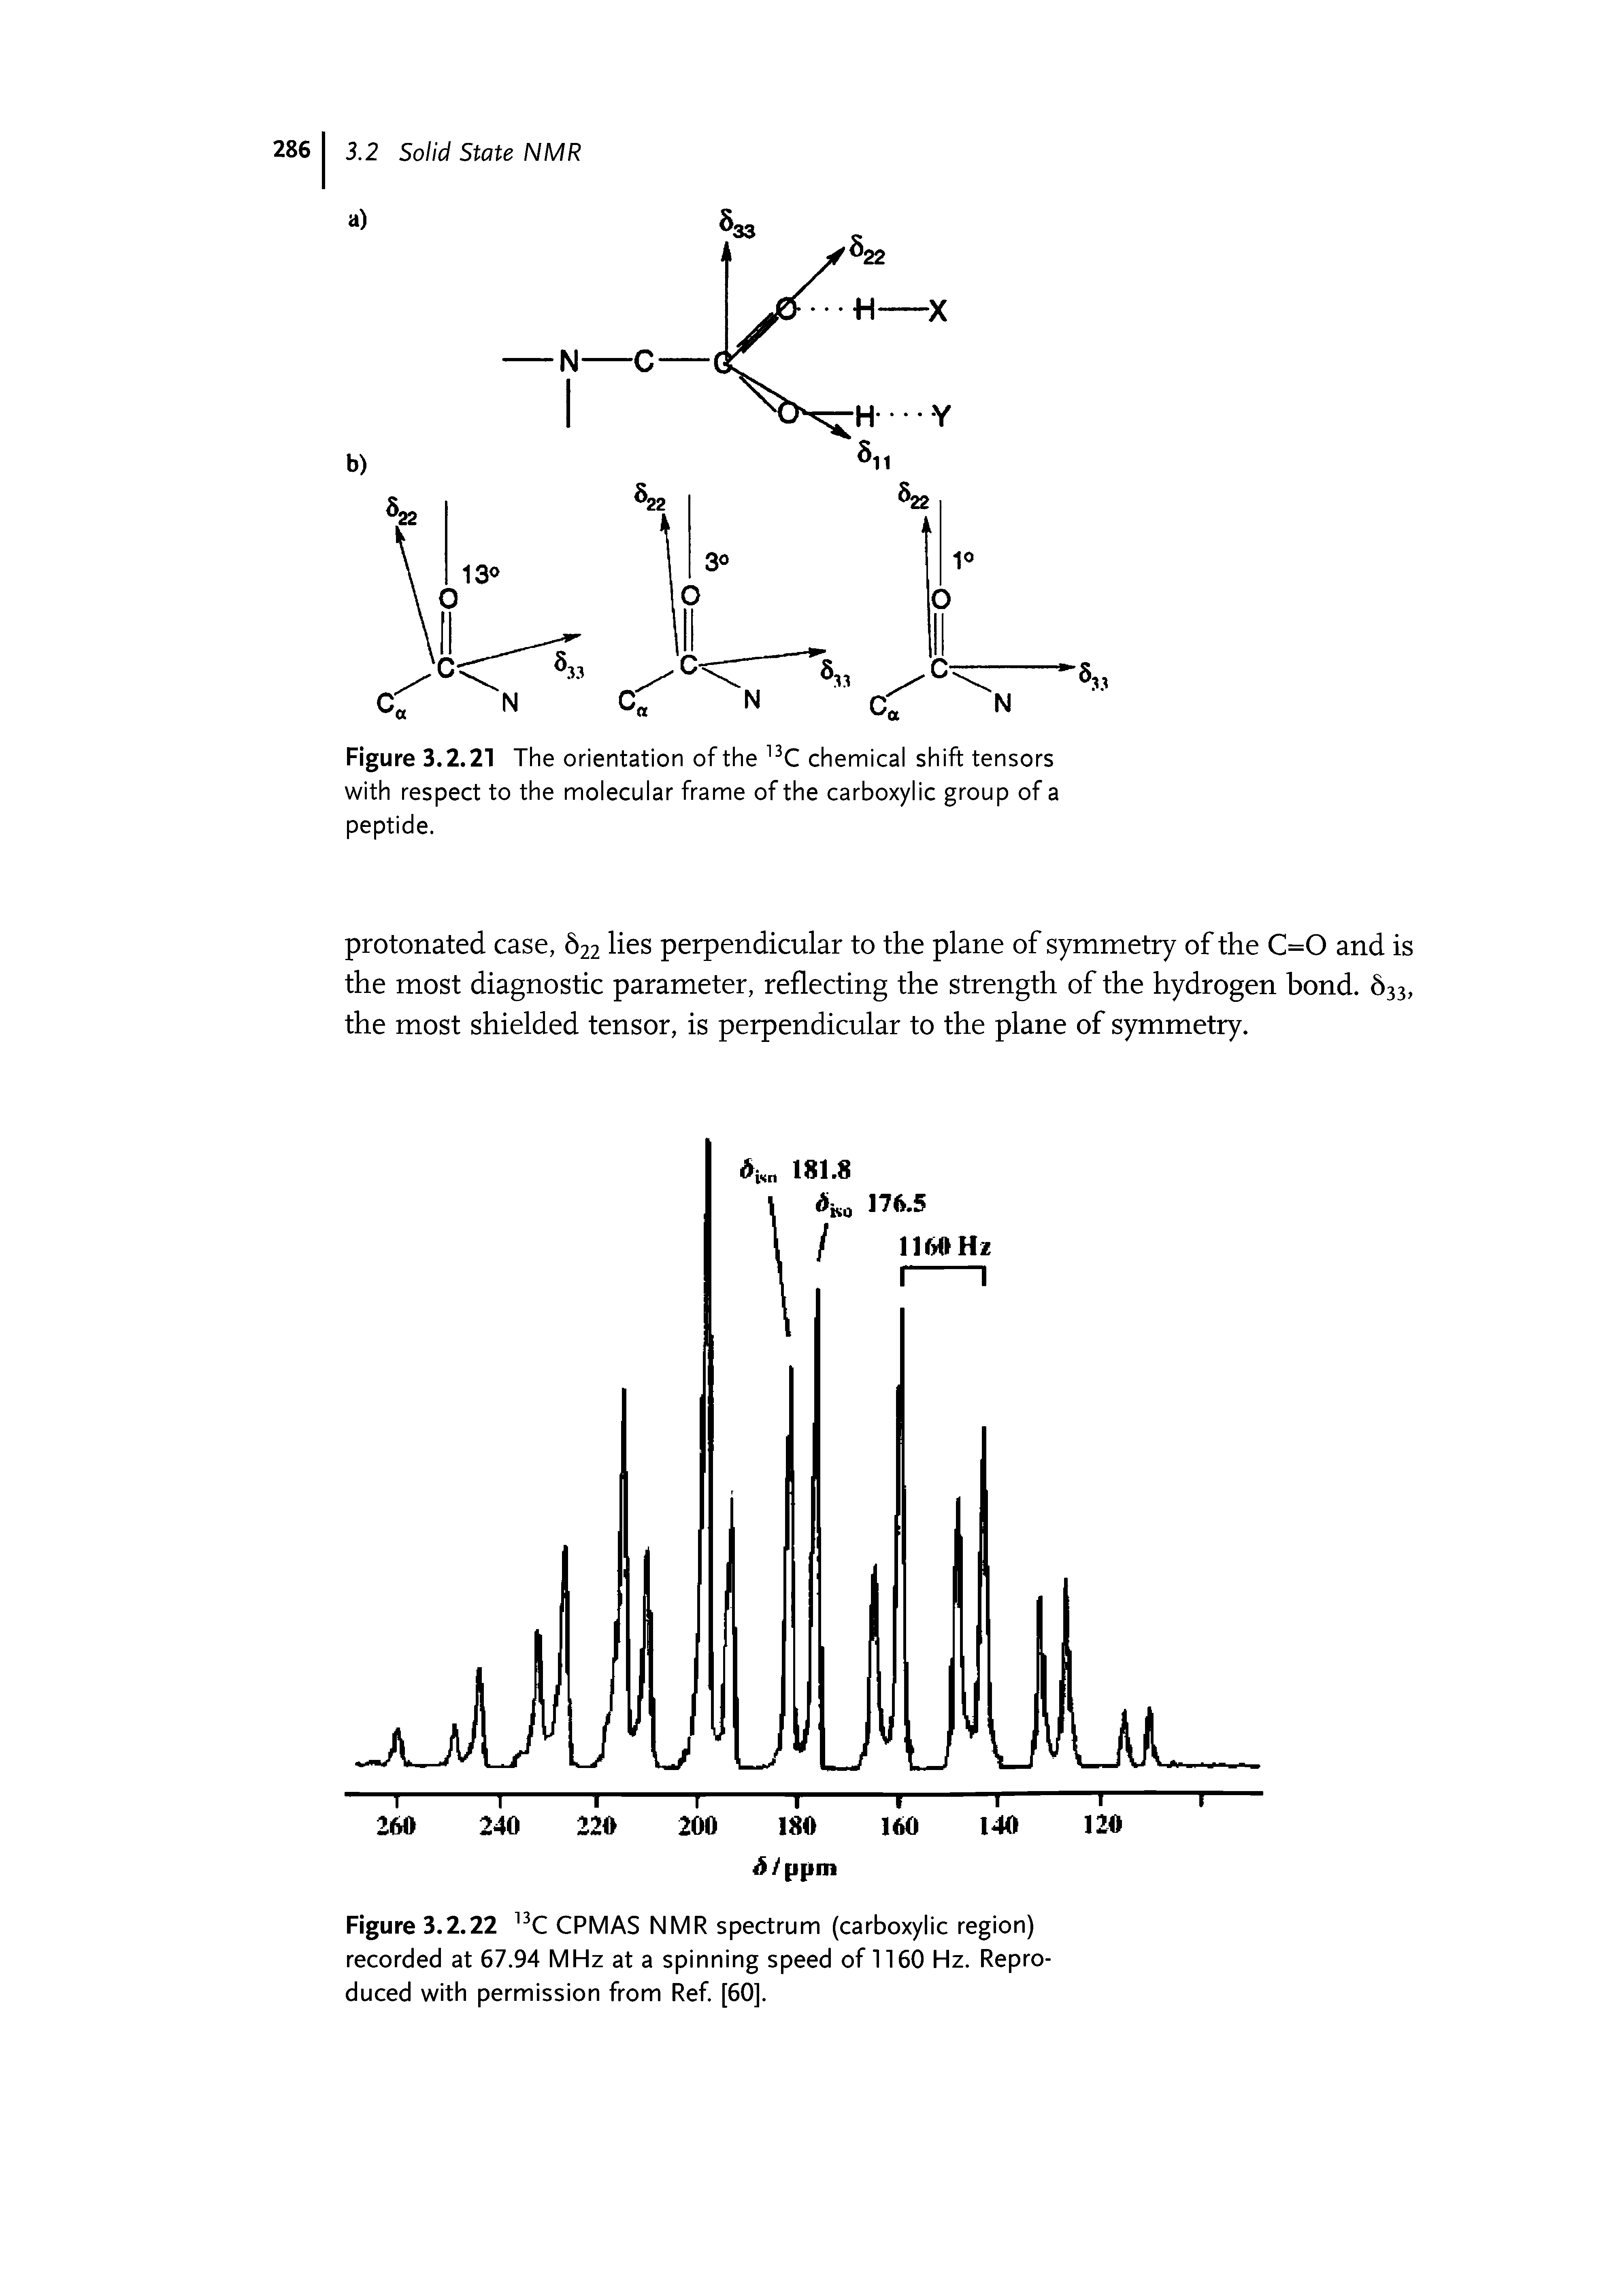 Figure 3.2.21 The orientation of the 13C chemical shift tensors with respect to the molecular frame of the carboxylic group of a peptide.